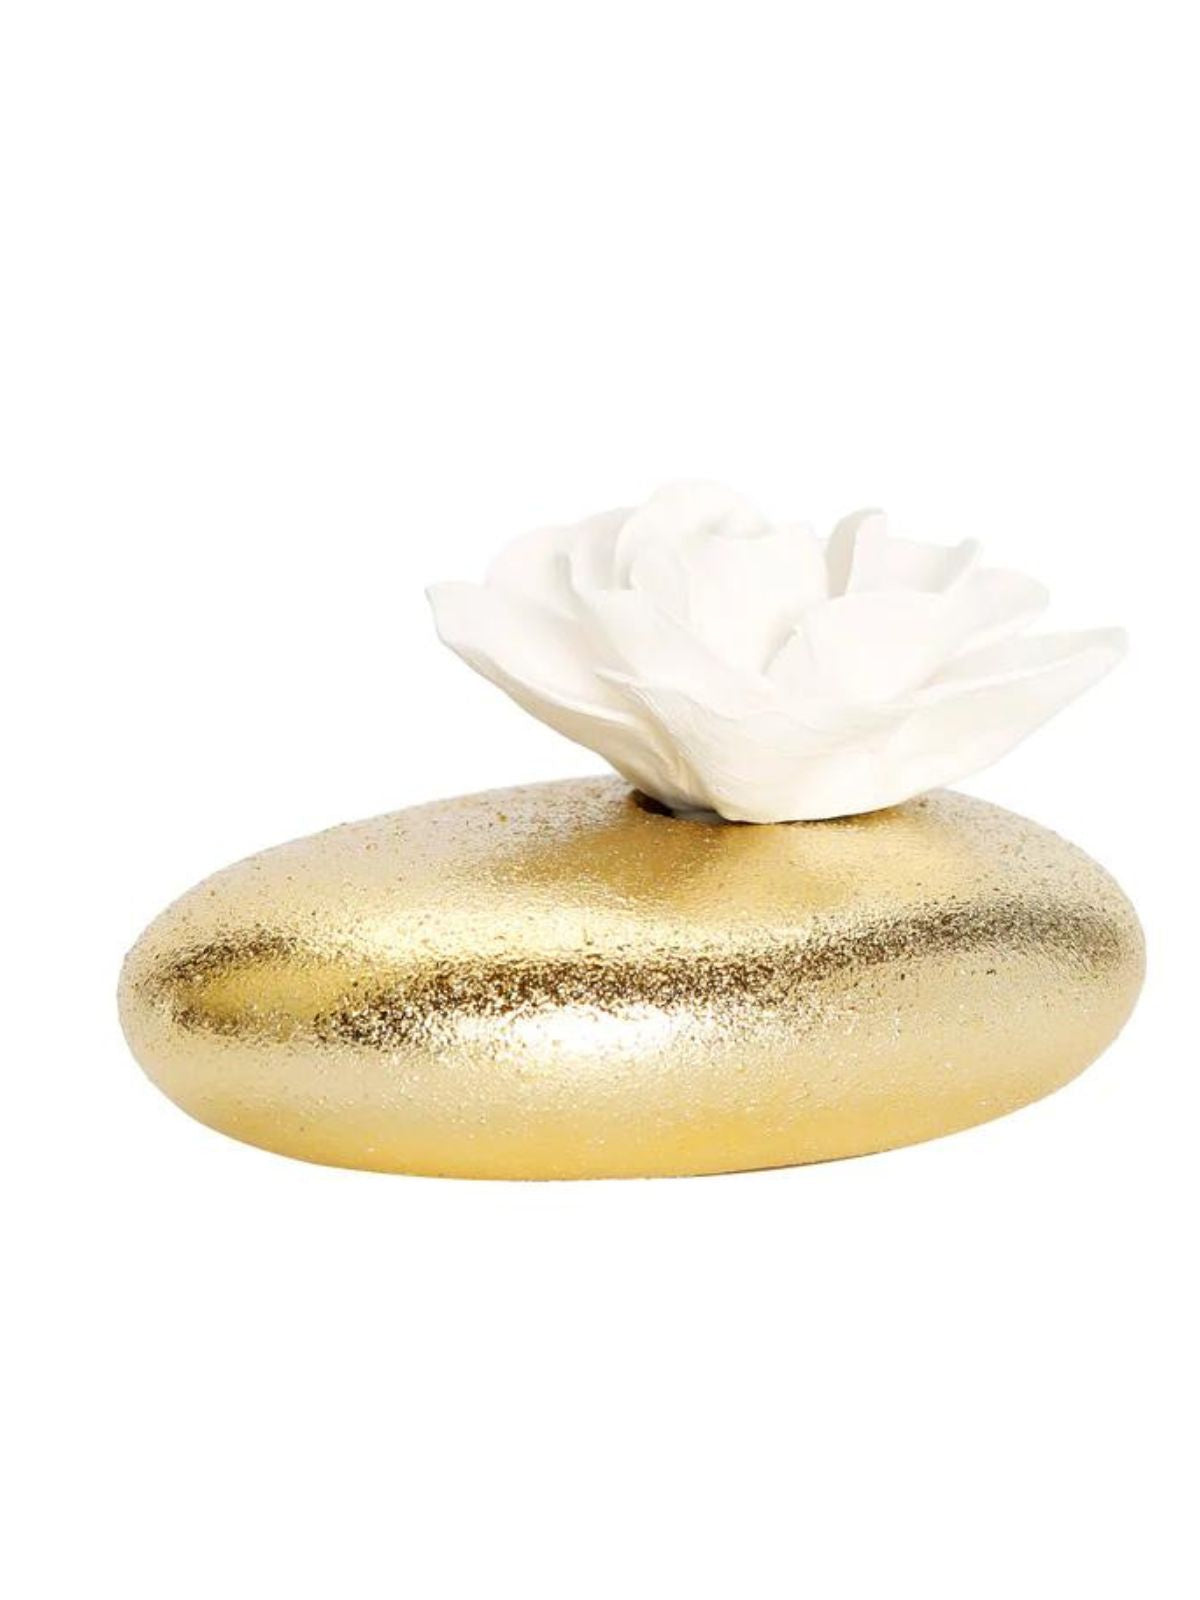 Matte gold porcelain oil diffuser with a white dimensional floral top that dispenses a floral scent - KYA Home Decor.